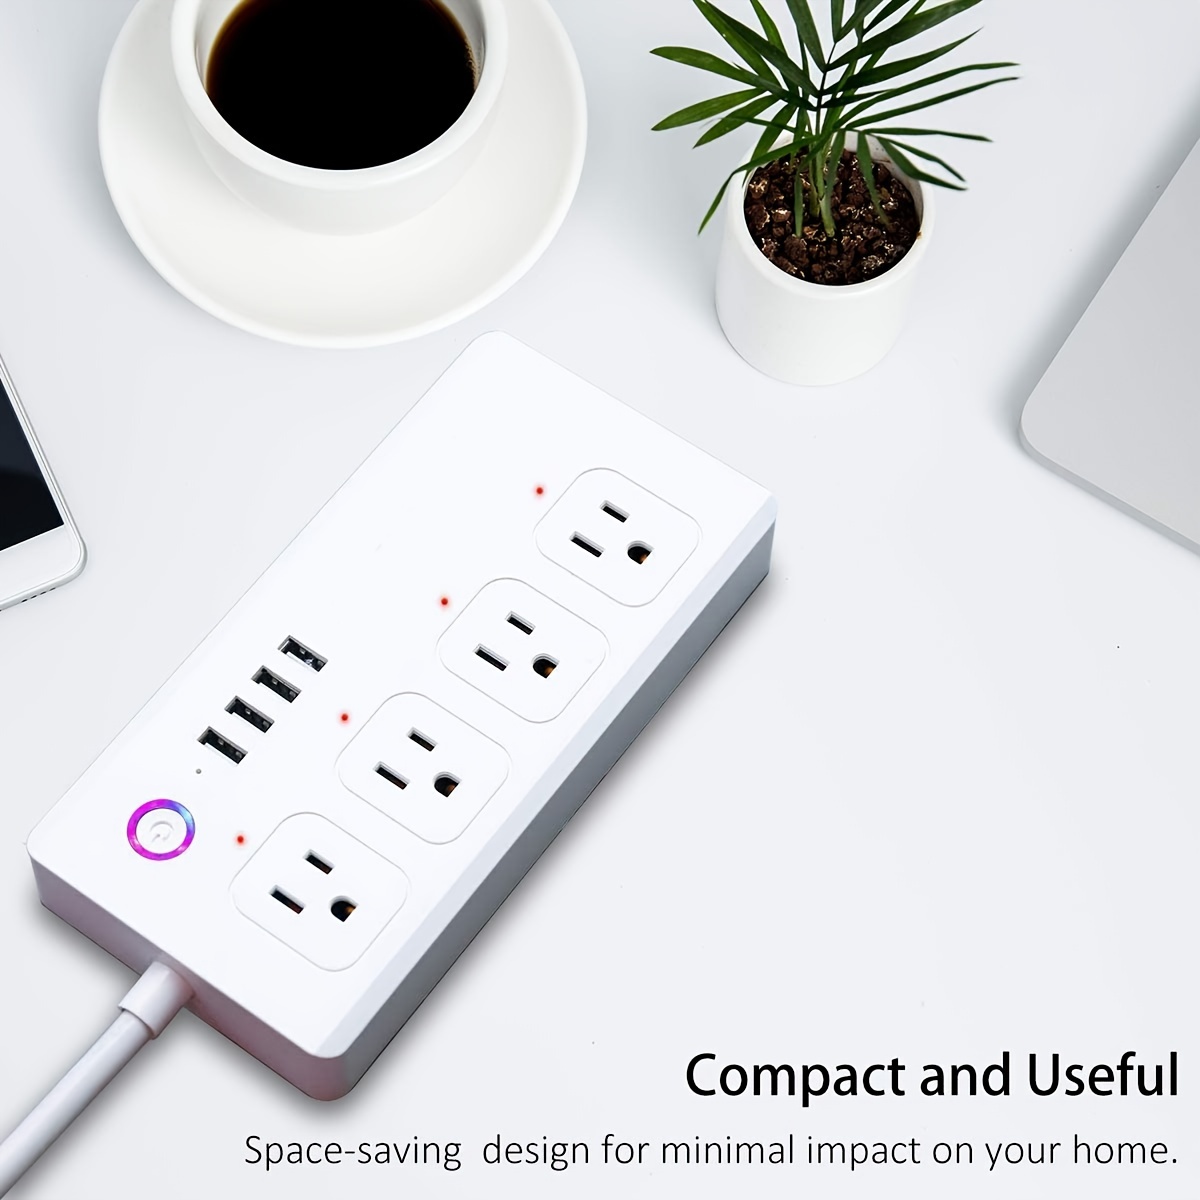 Remote Controlled Power Strip with USB and Wi-Fi - Smart power